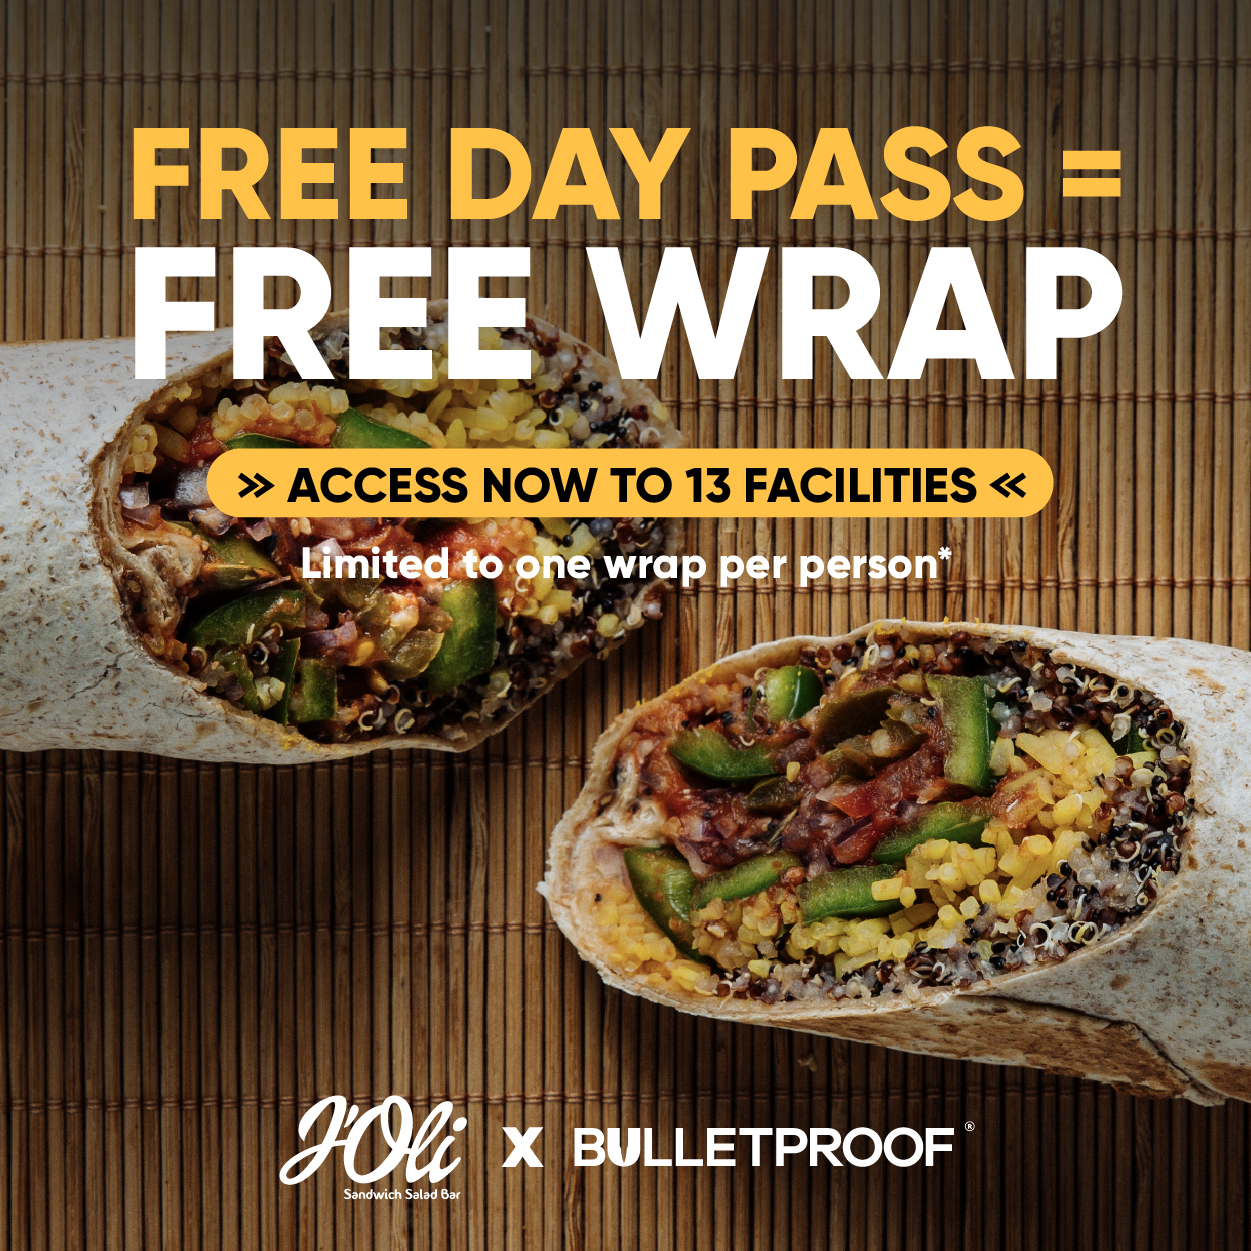 Visit a facility via our Free Day Passes & get a FREE Wrap from J'Oli.